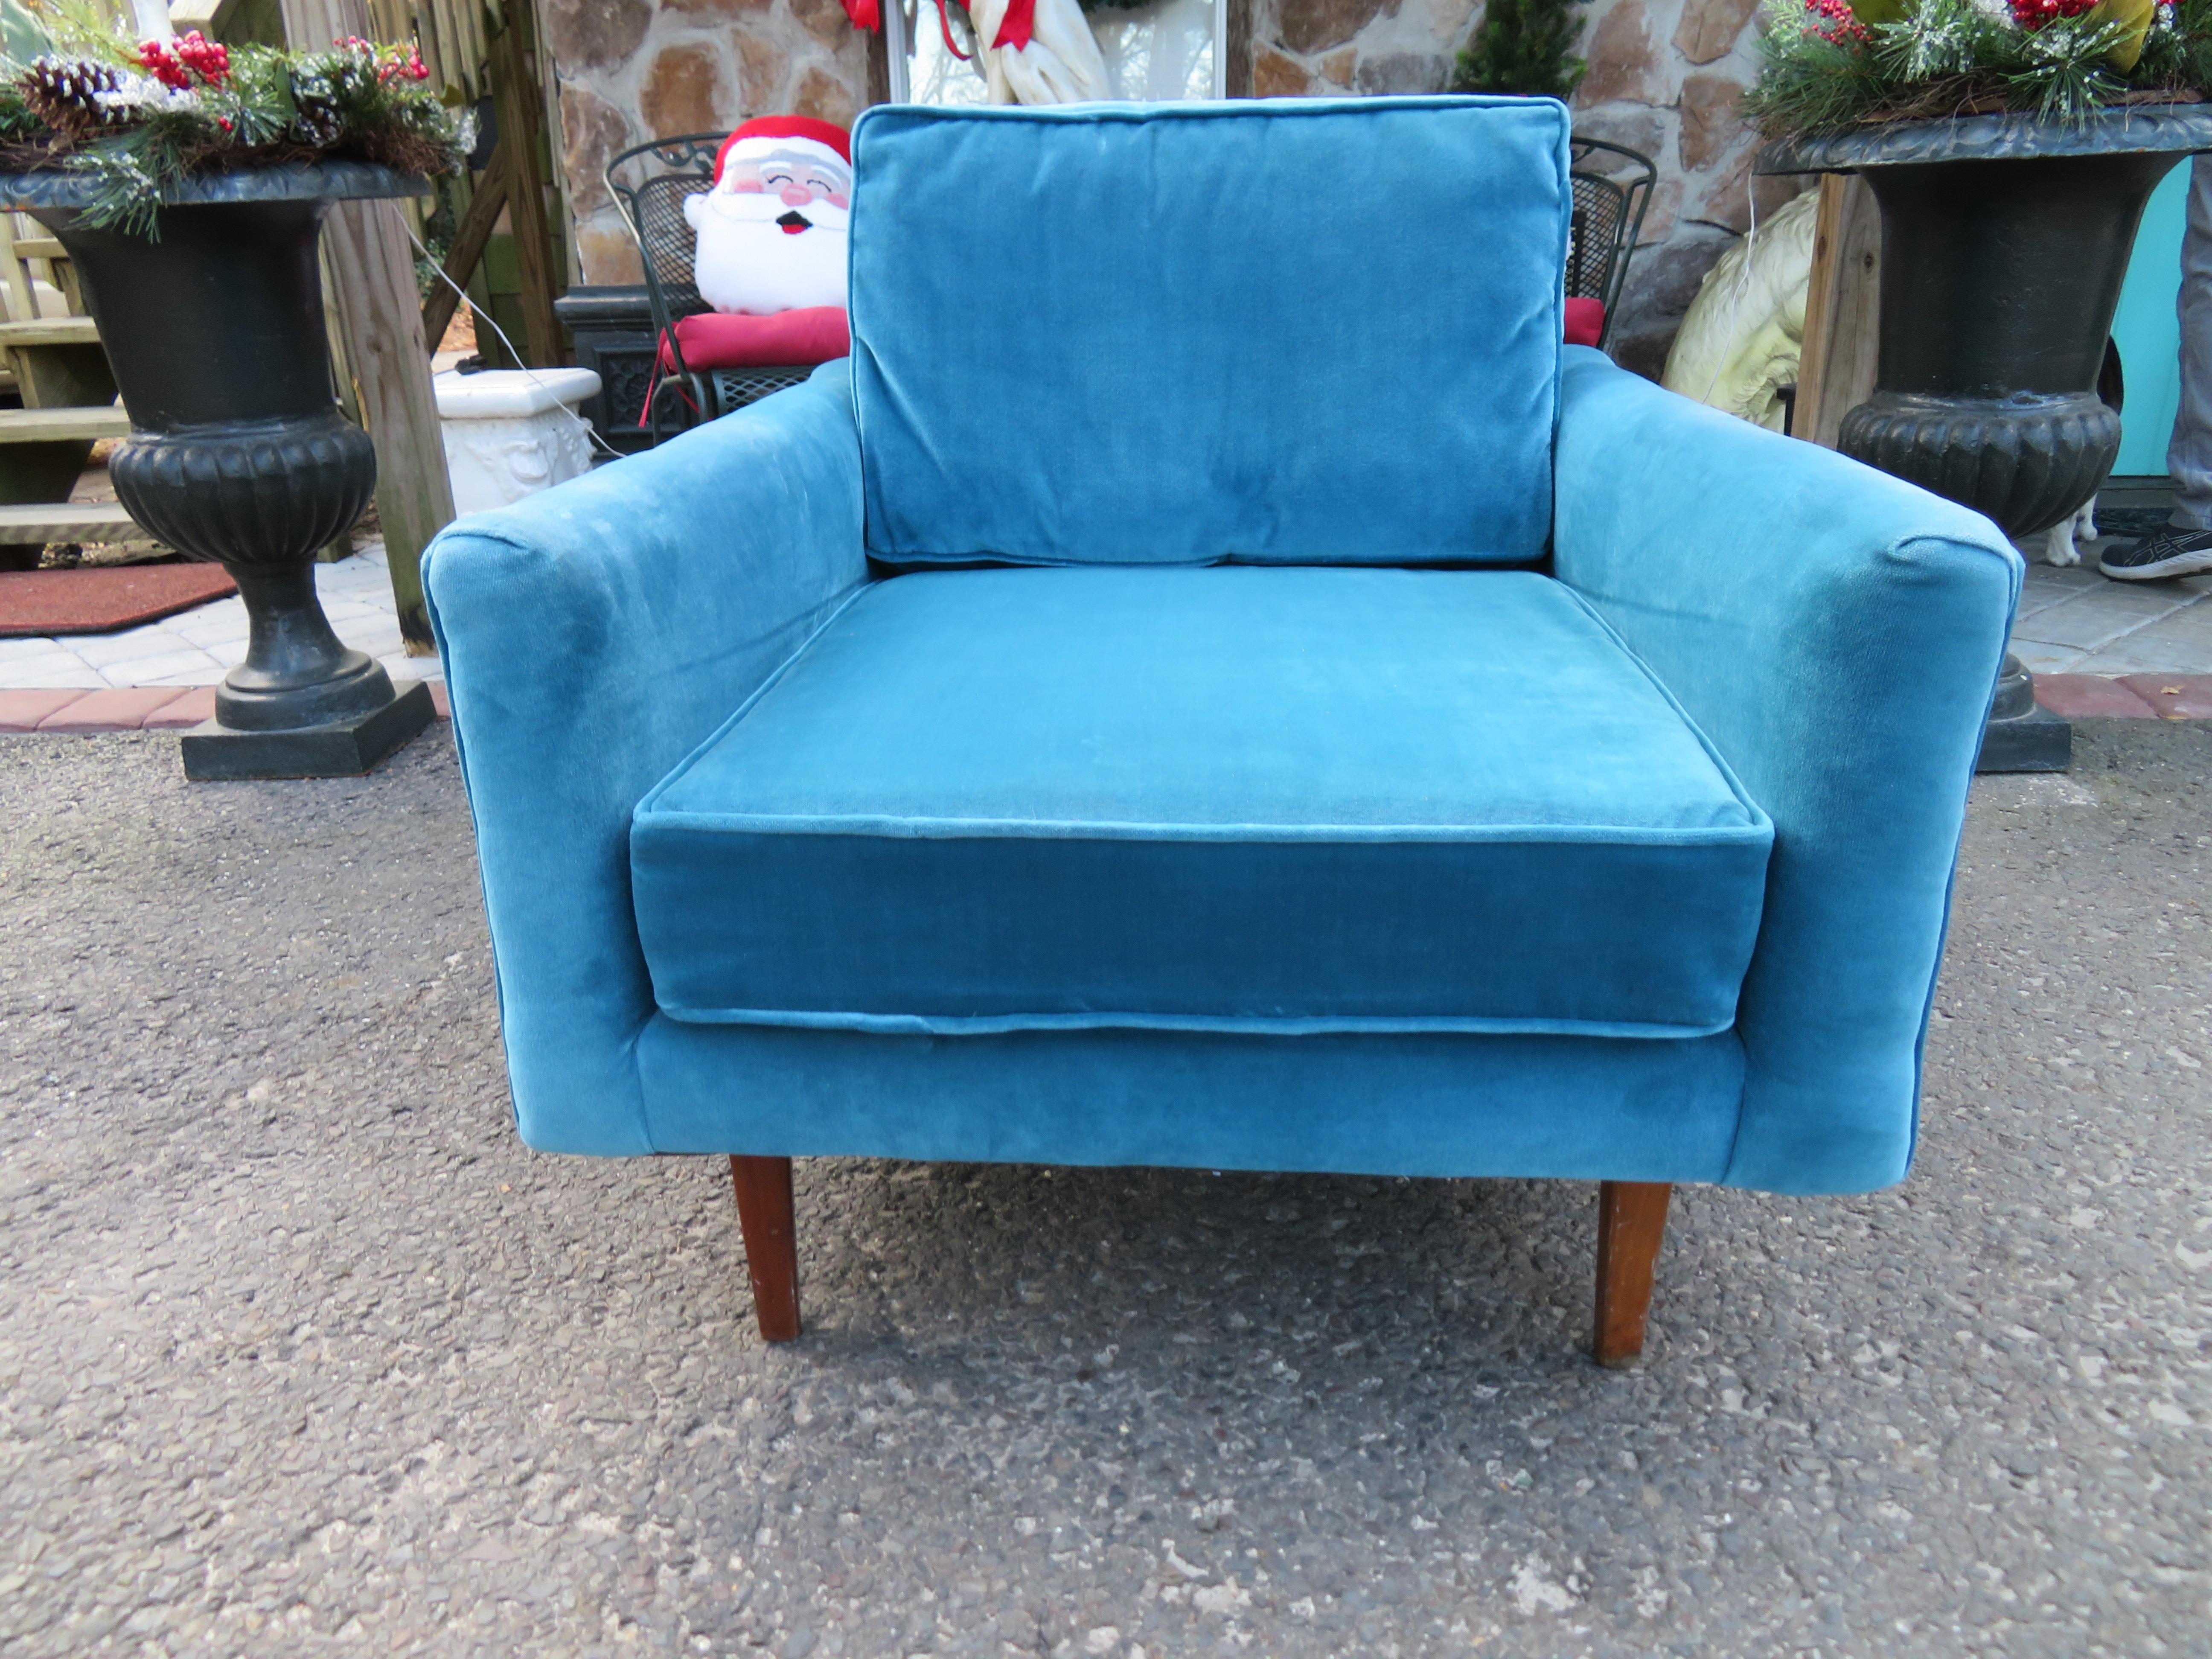 Handsome Milo Baughman for Thayer Coggin lounge chair. This chair was re-upholstered about 15-20 years ago by the original owner. The fabric is a stylish cotton velvet and is quite nice but the upholstery seems a bit uneven. We recommend having it